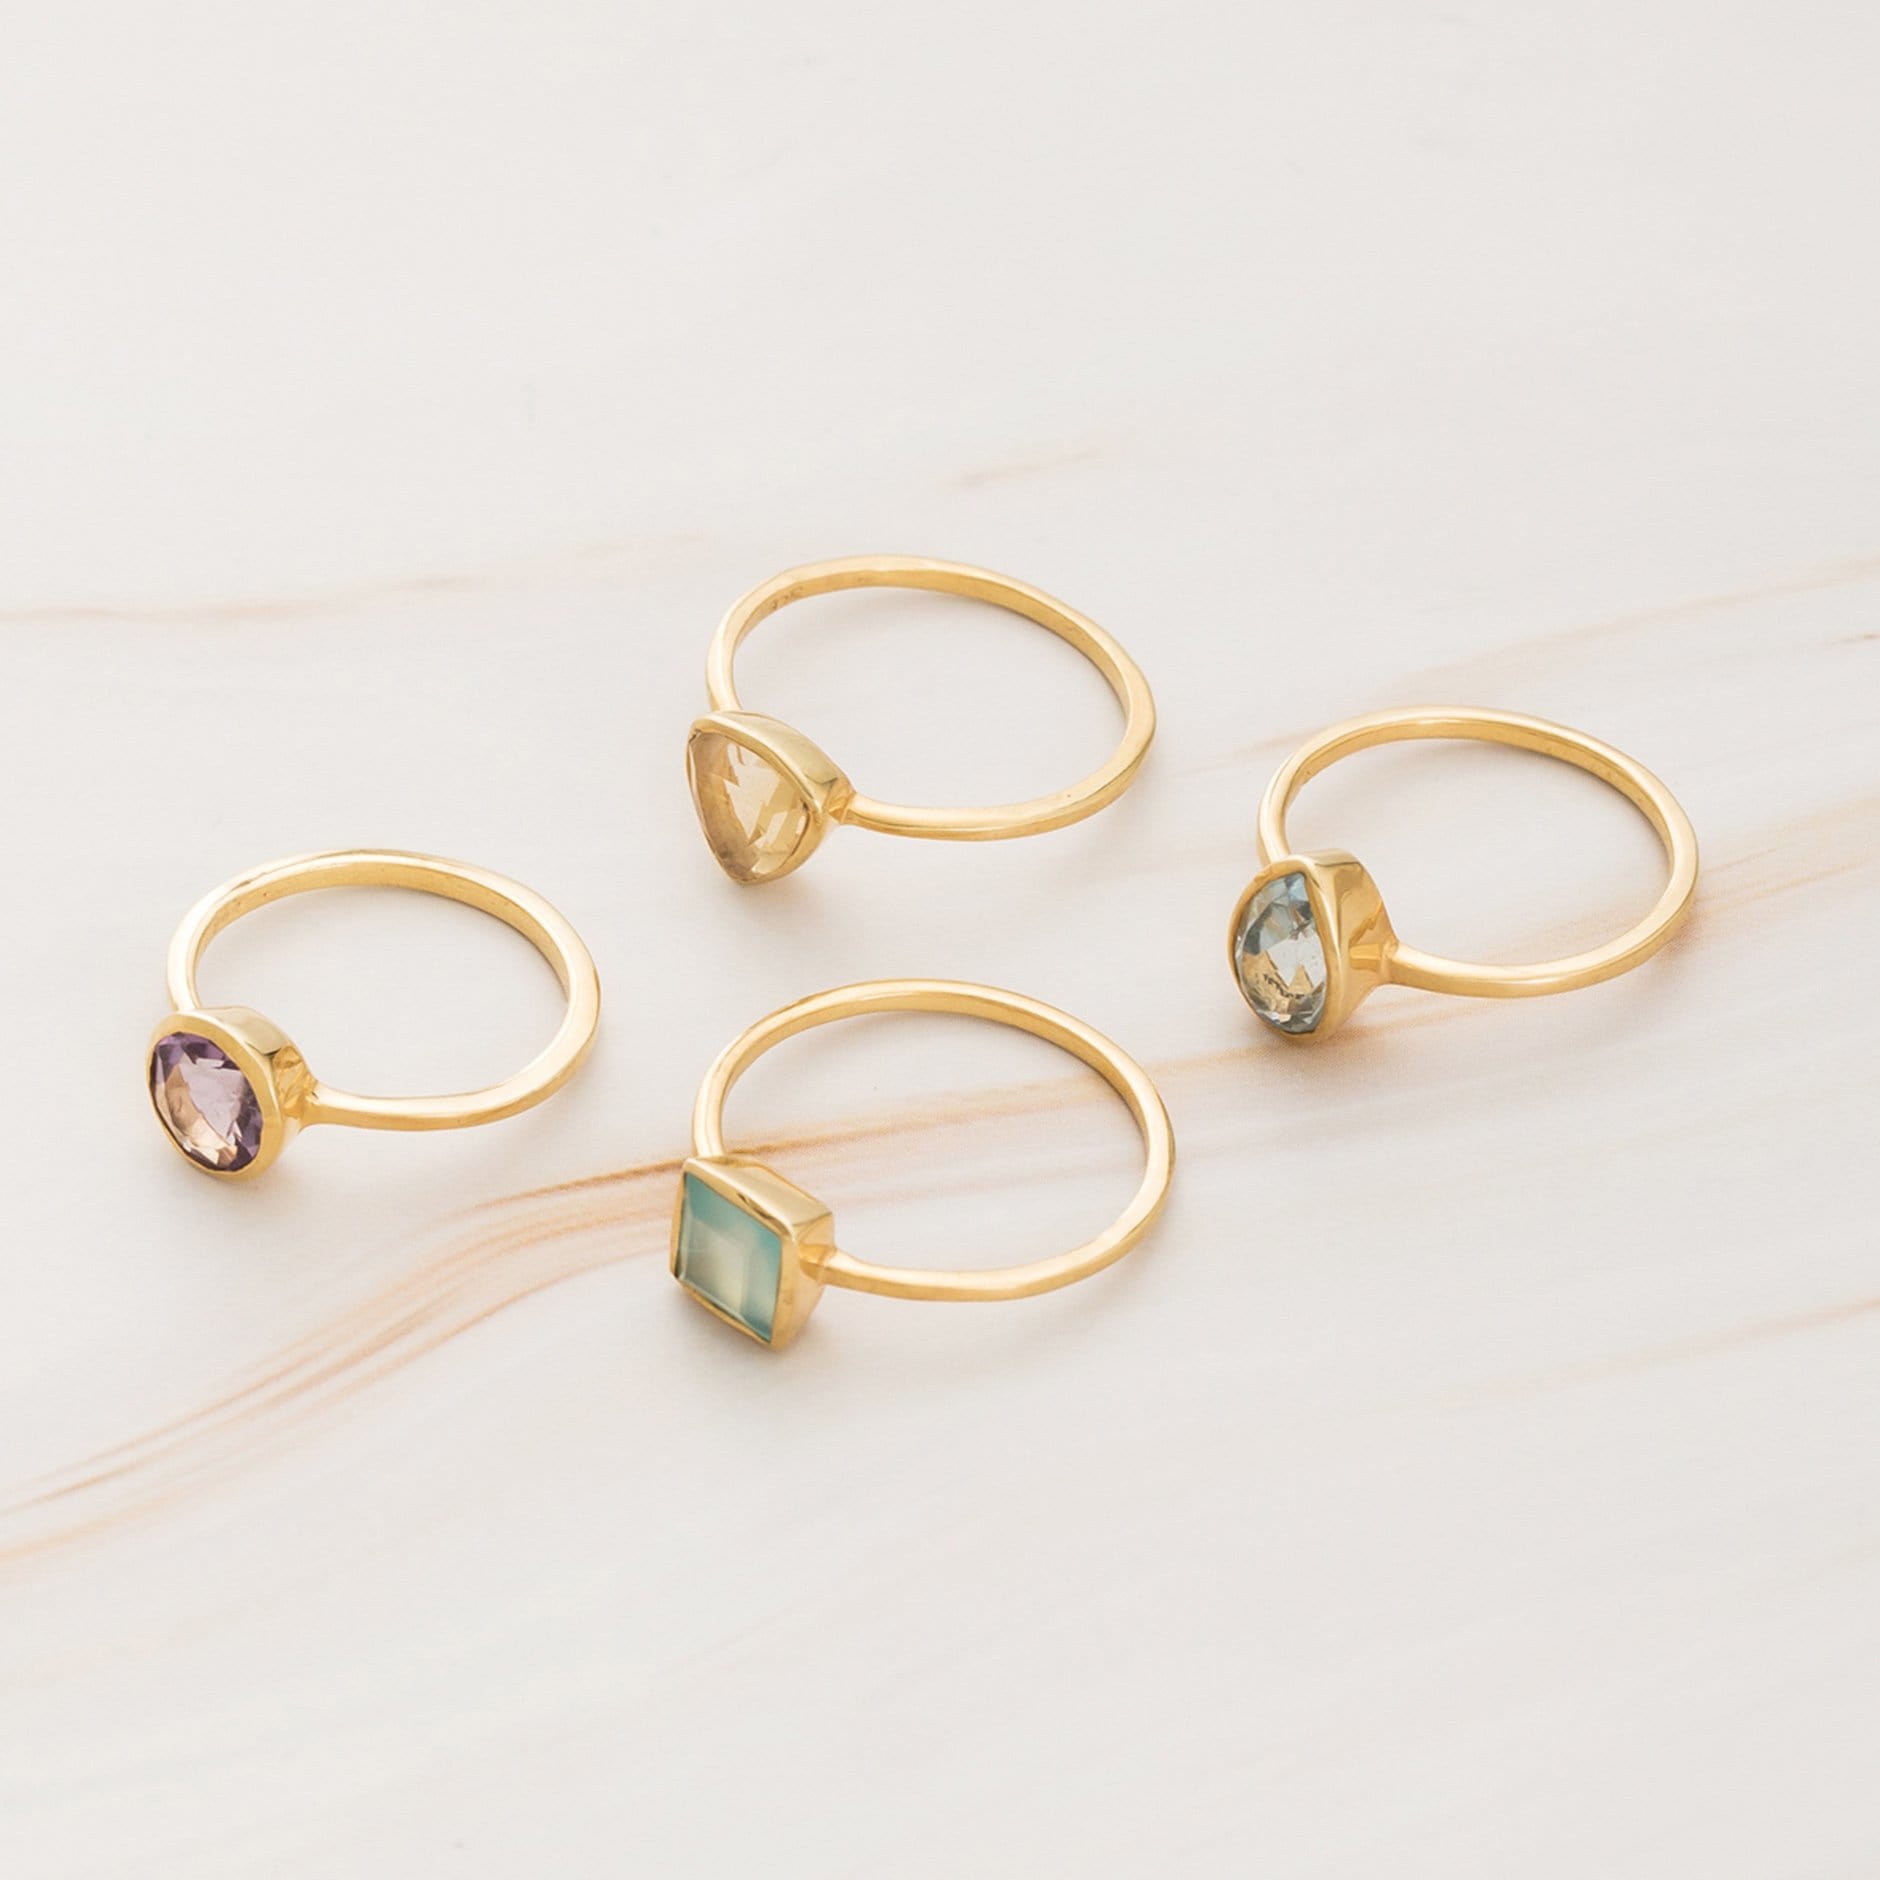 Emblem Jewelry Rings Signature Candy Gemstone Stack Rings (Ring Size 4)